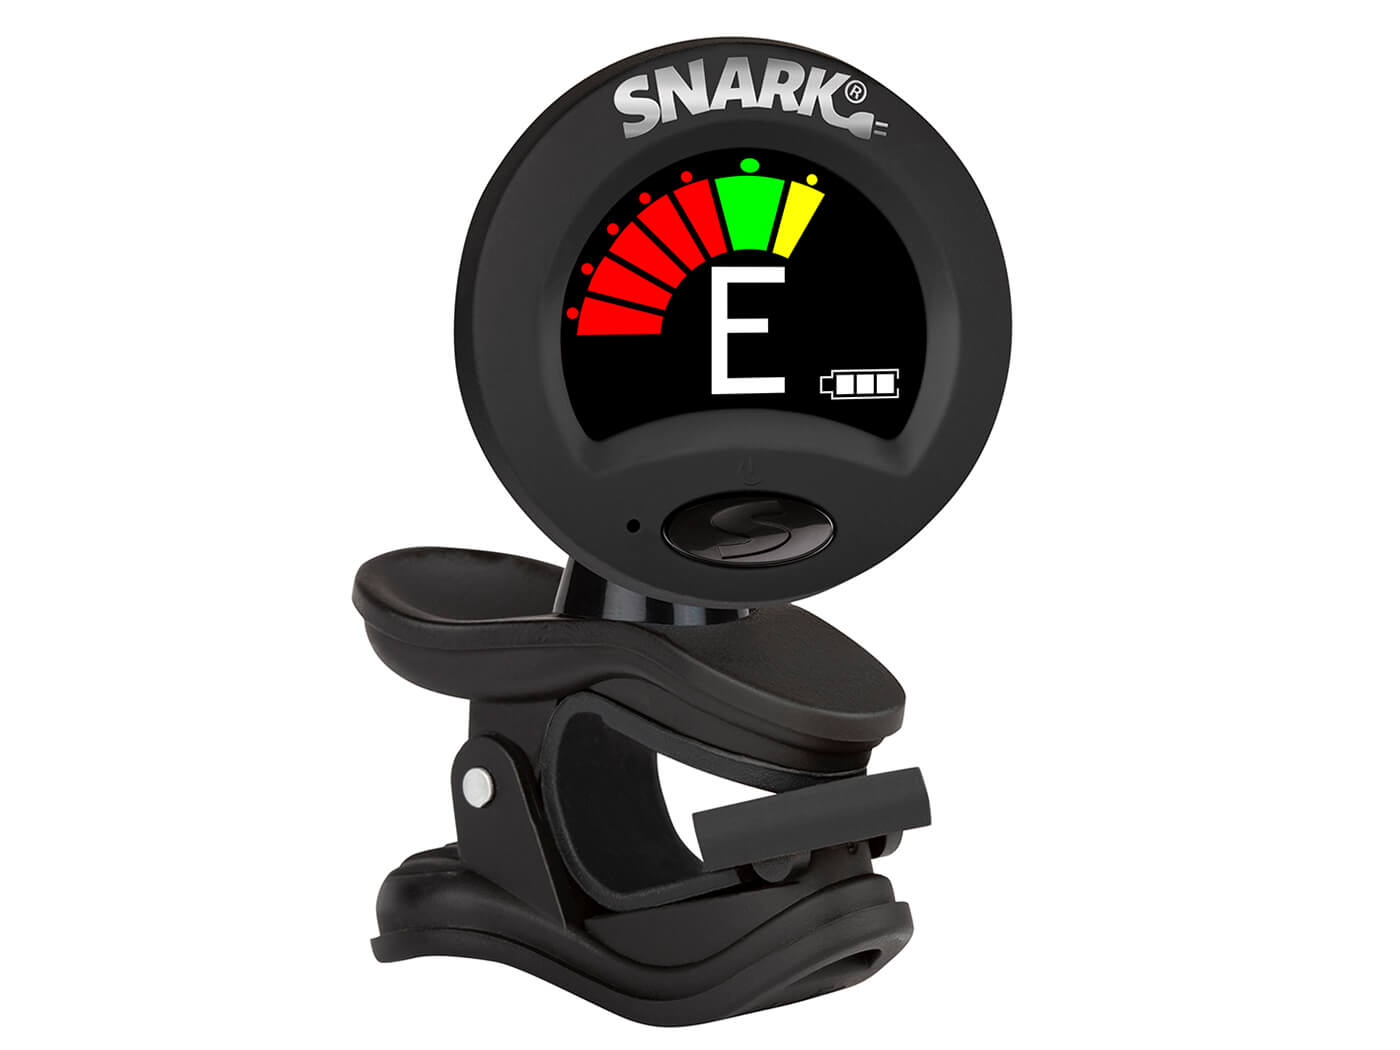 Rechargeable Snark tuner